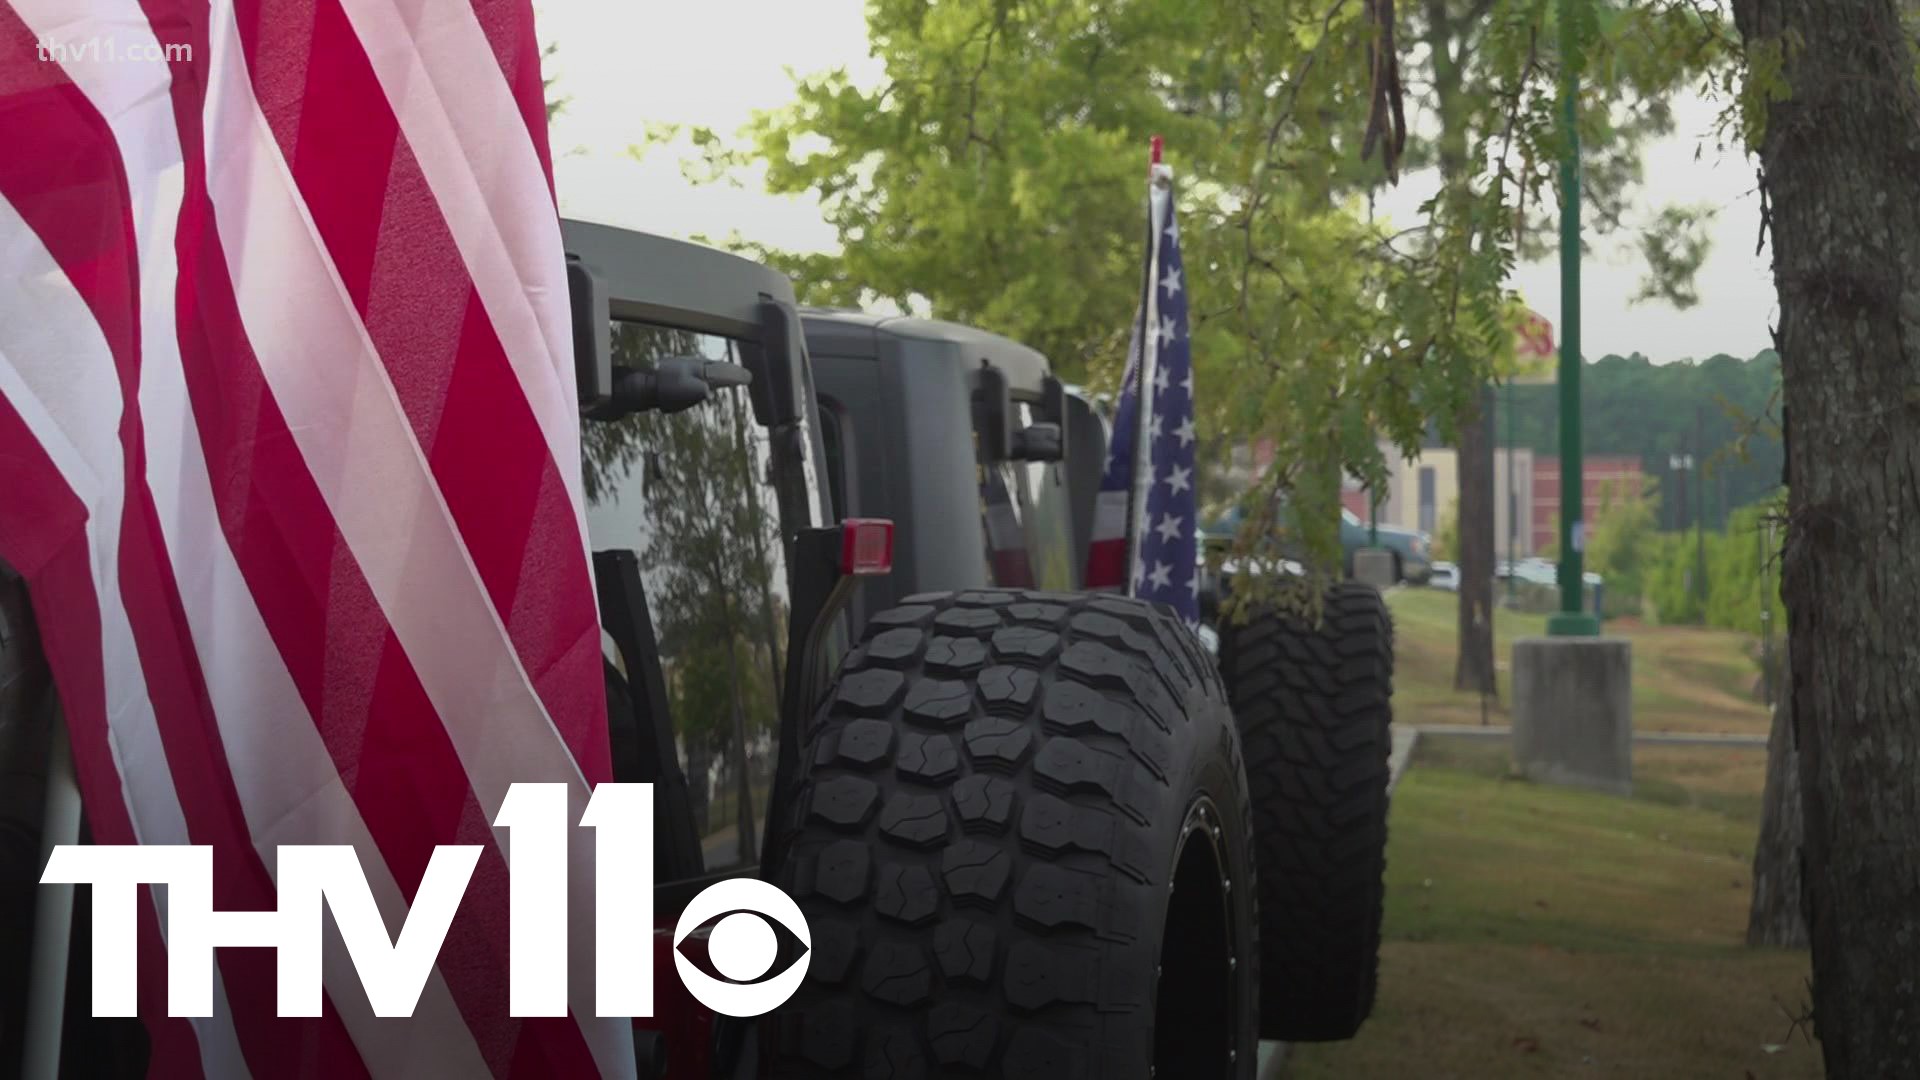 The 501 Jeep Club is heading down to New Orleans to help the city recover from the massive damage from Hurricane Ida.